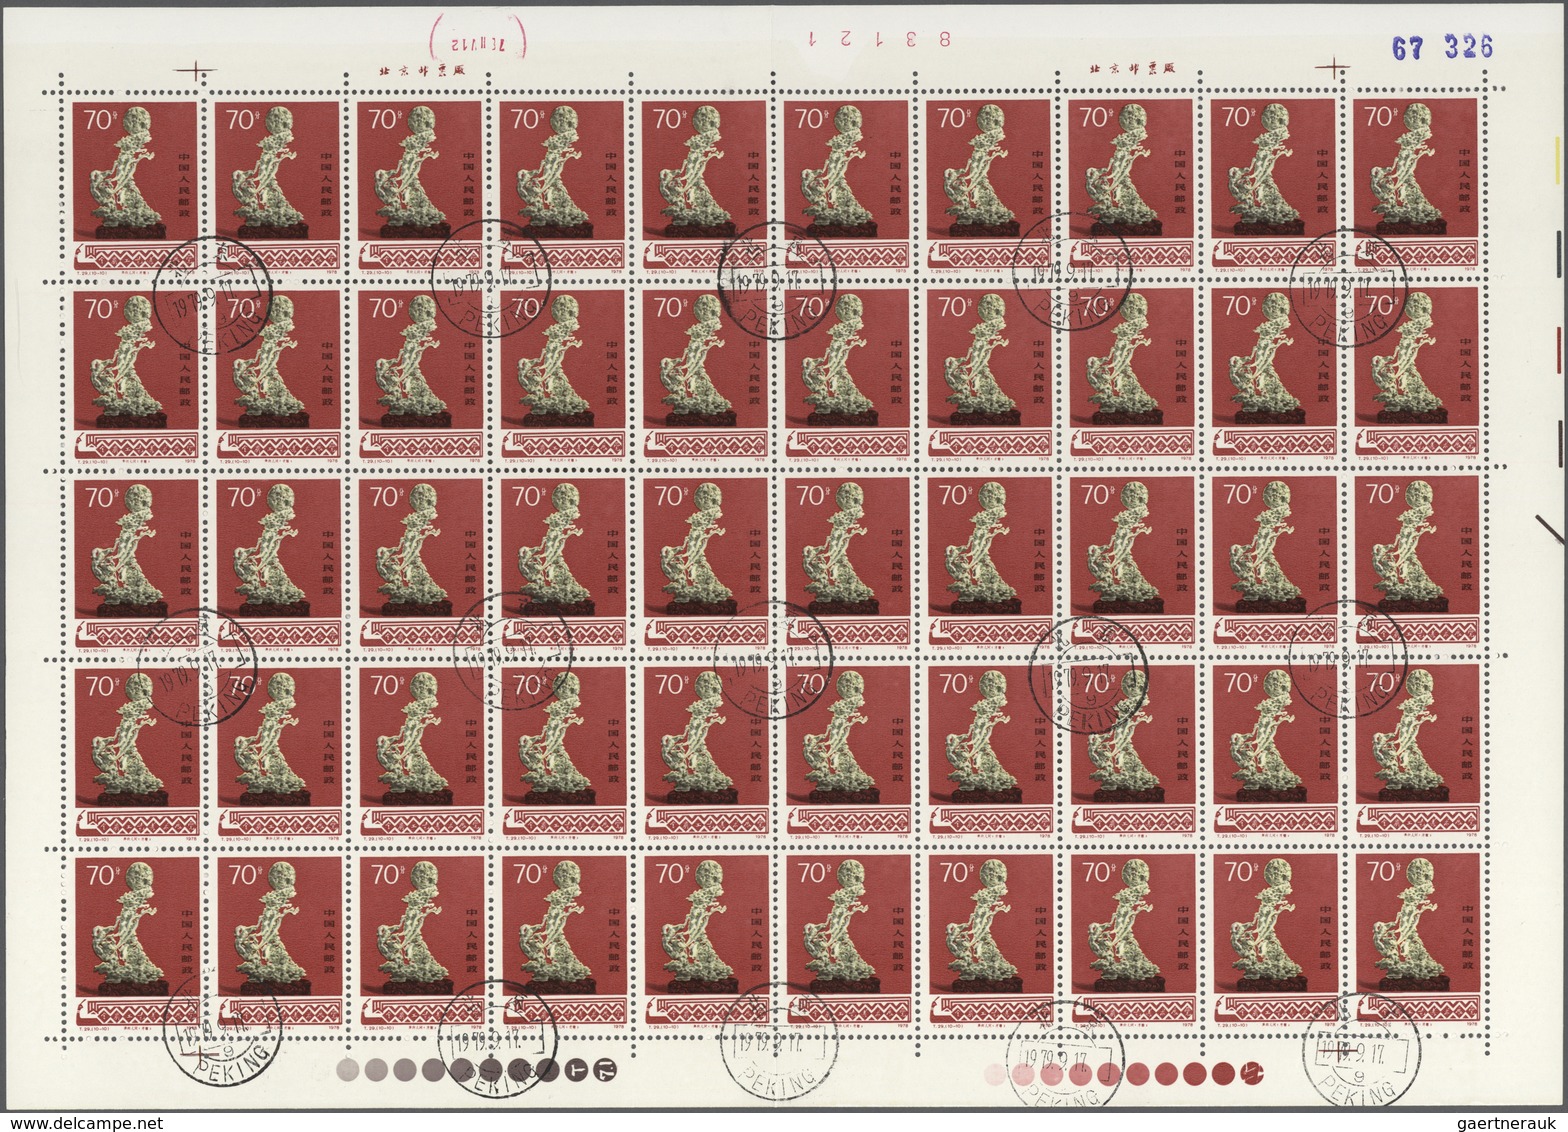 China - Volksrepublik: 1978, Arts and Crafts (T29), 50 complete sets of 10 as full sheets, CTO cance